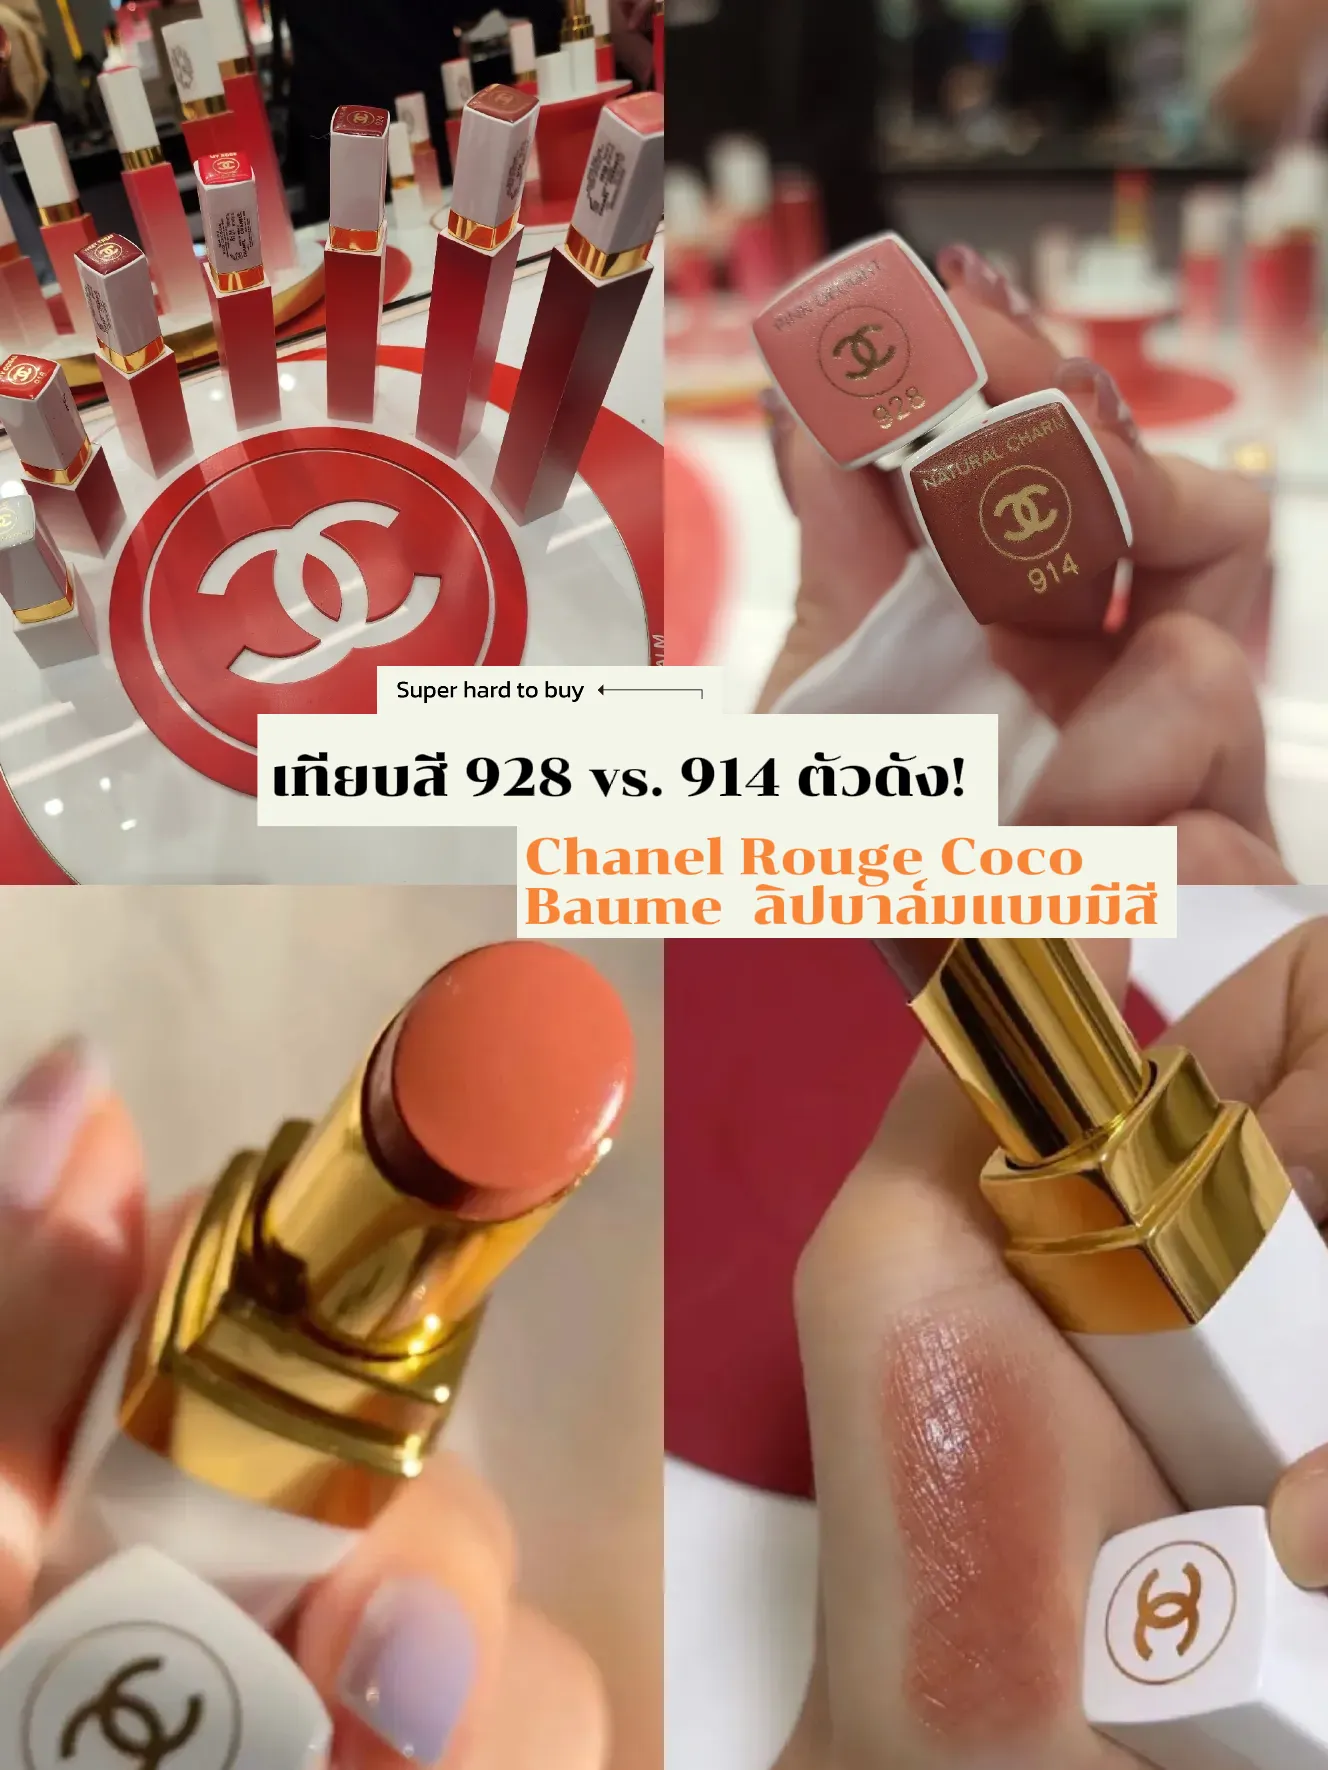 Chanel Rouge Coco Baume Color Swash Lip Balm With White Stick Color, Gallery posted by Natt